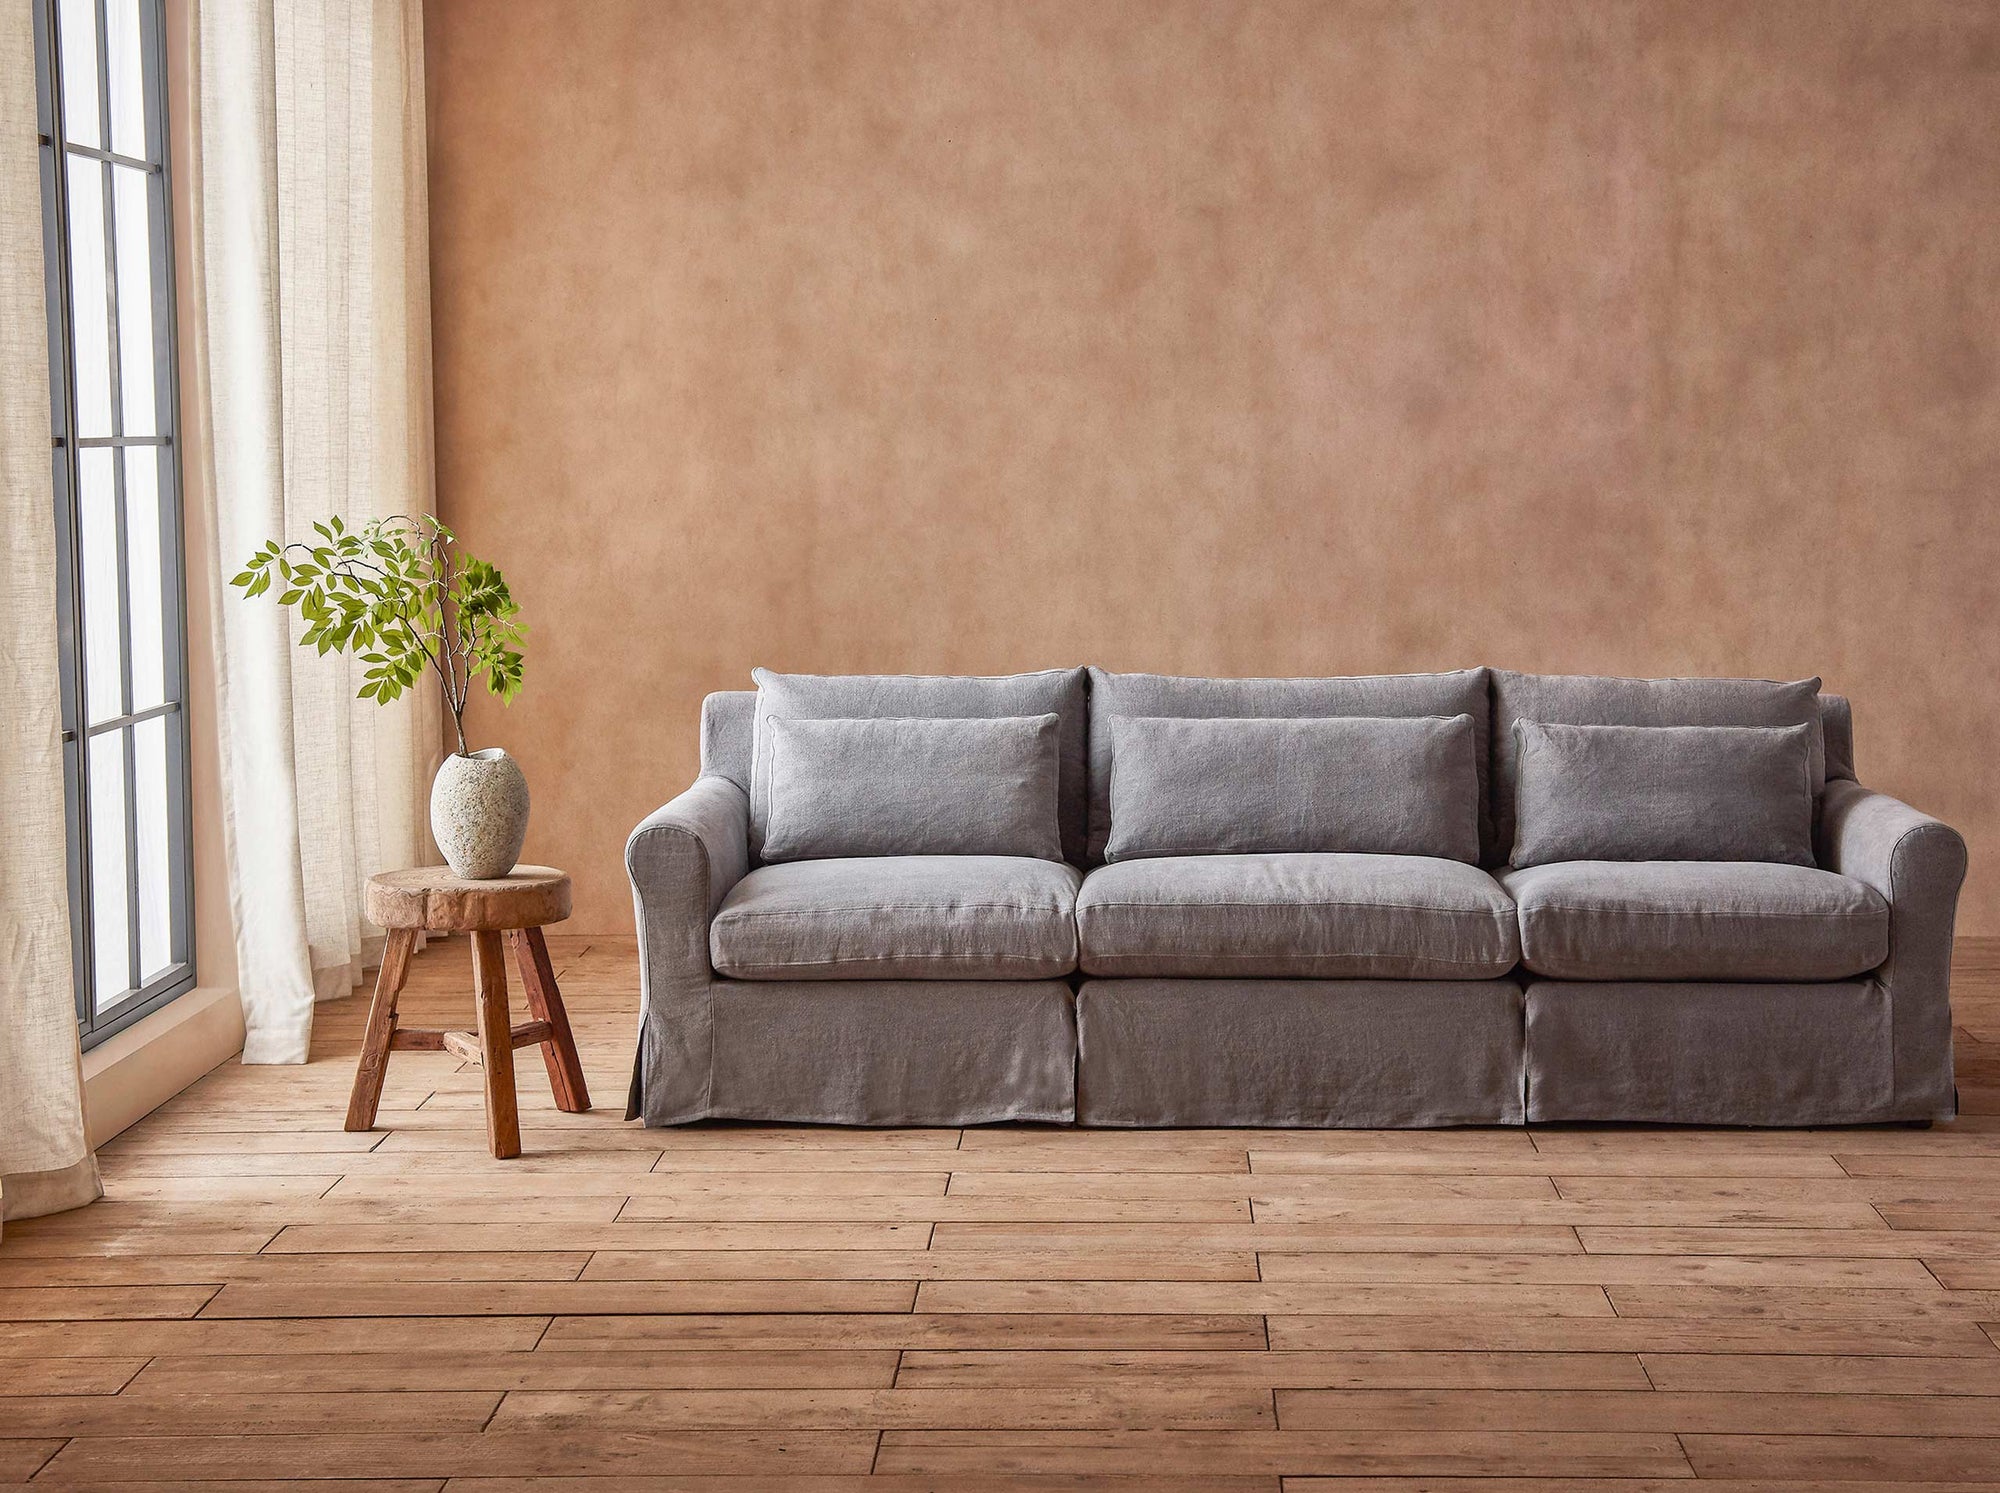 Elias Sectional Sofa in Ink Cap, a medium cool grey Light Weight Linen, placed in a sunlit room next to a plant in a vase on a stool